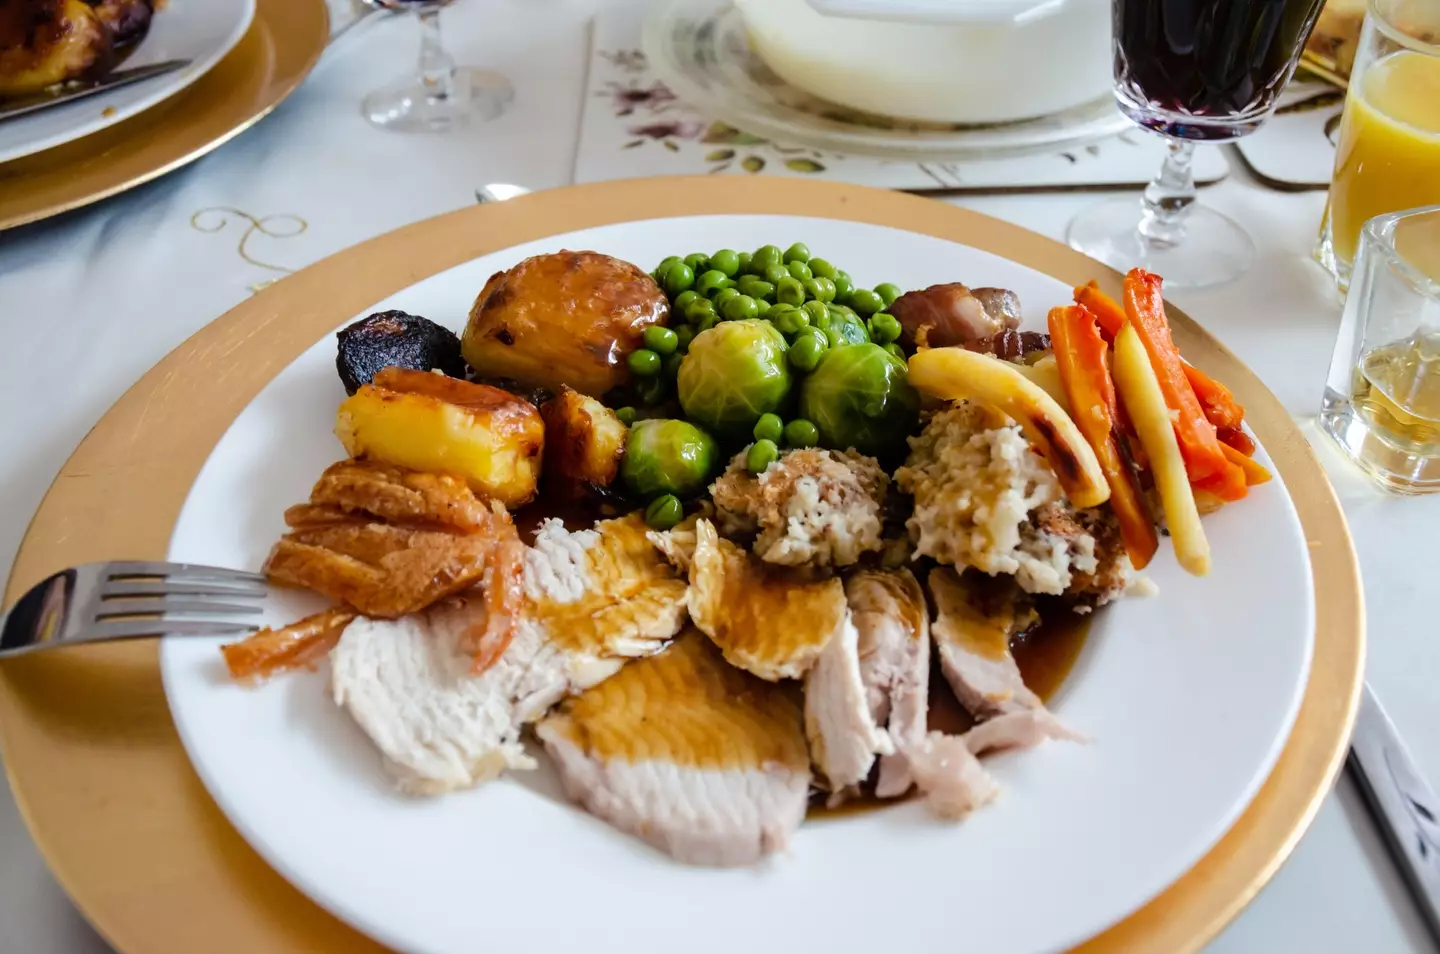 People are debating whether or not dogs should be allowed to have Christmas dinner.